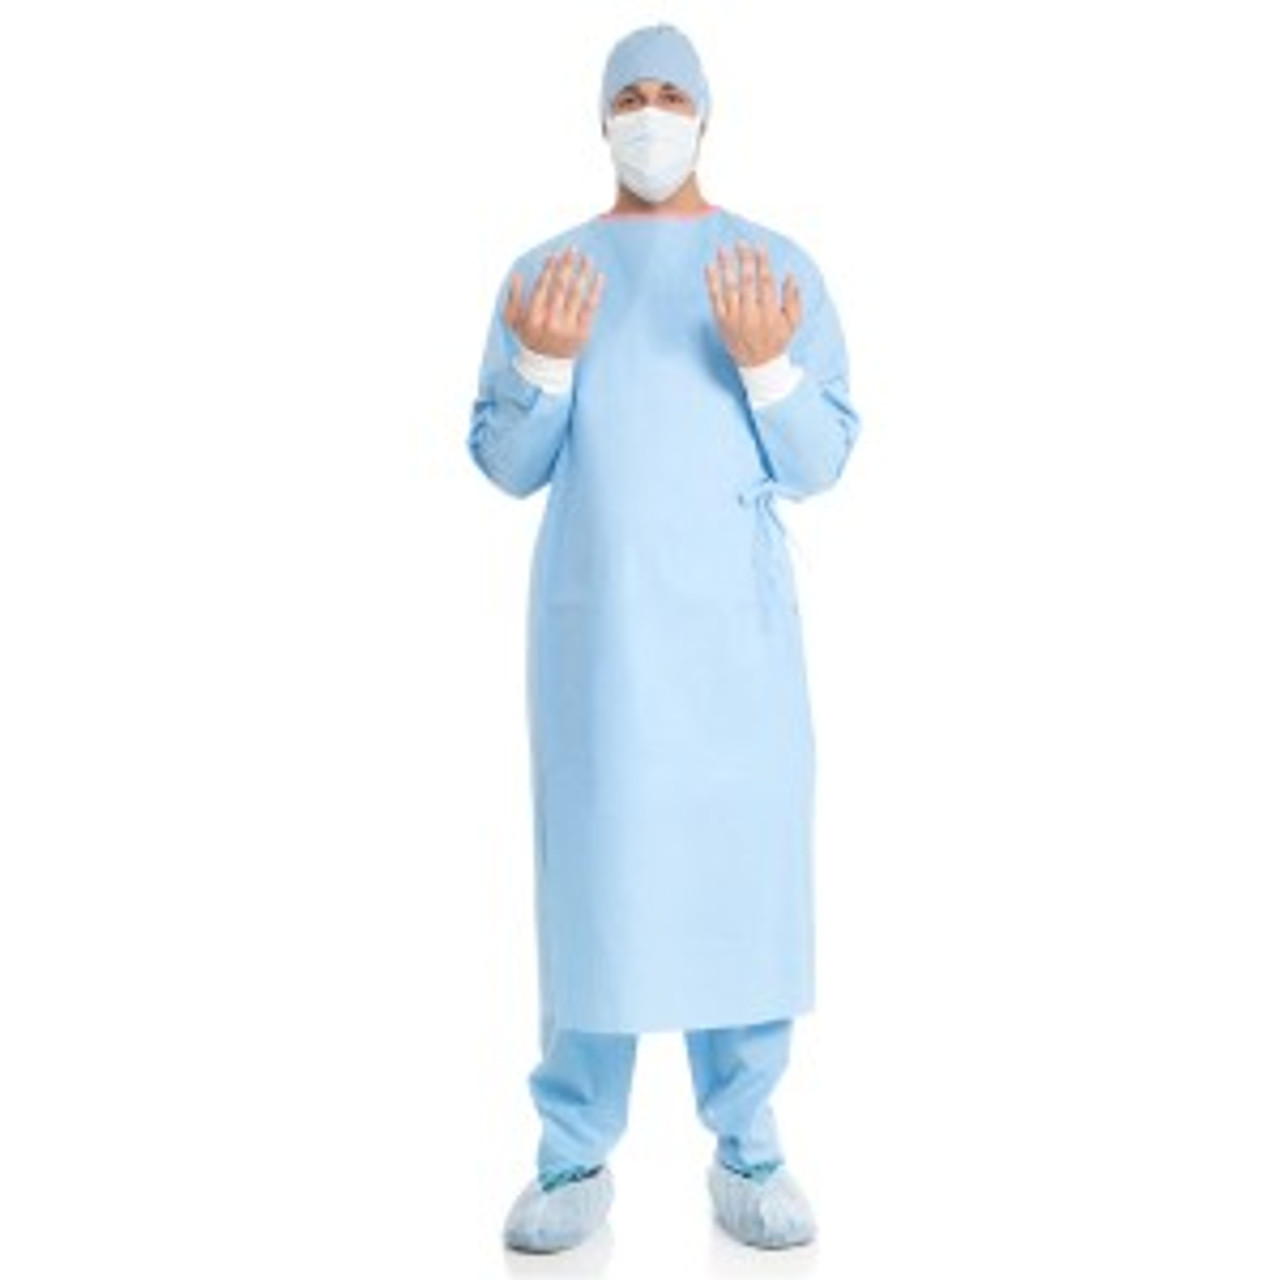 Halyard Kimguard ULTRA* Film-Reinforced Surgical Gown, XX-Large, Non-Sterile, 32/cs - 74431